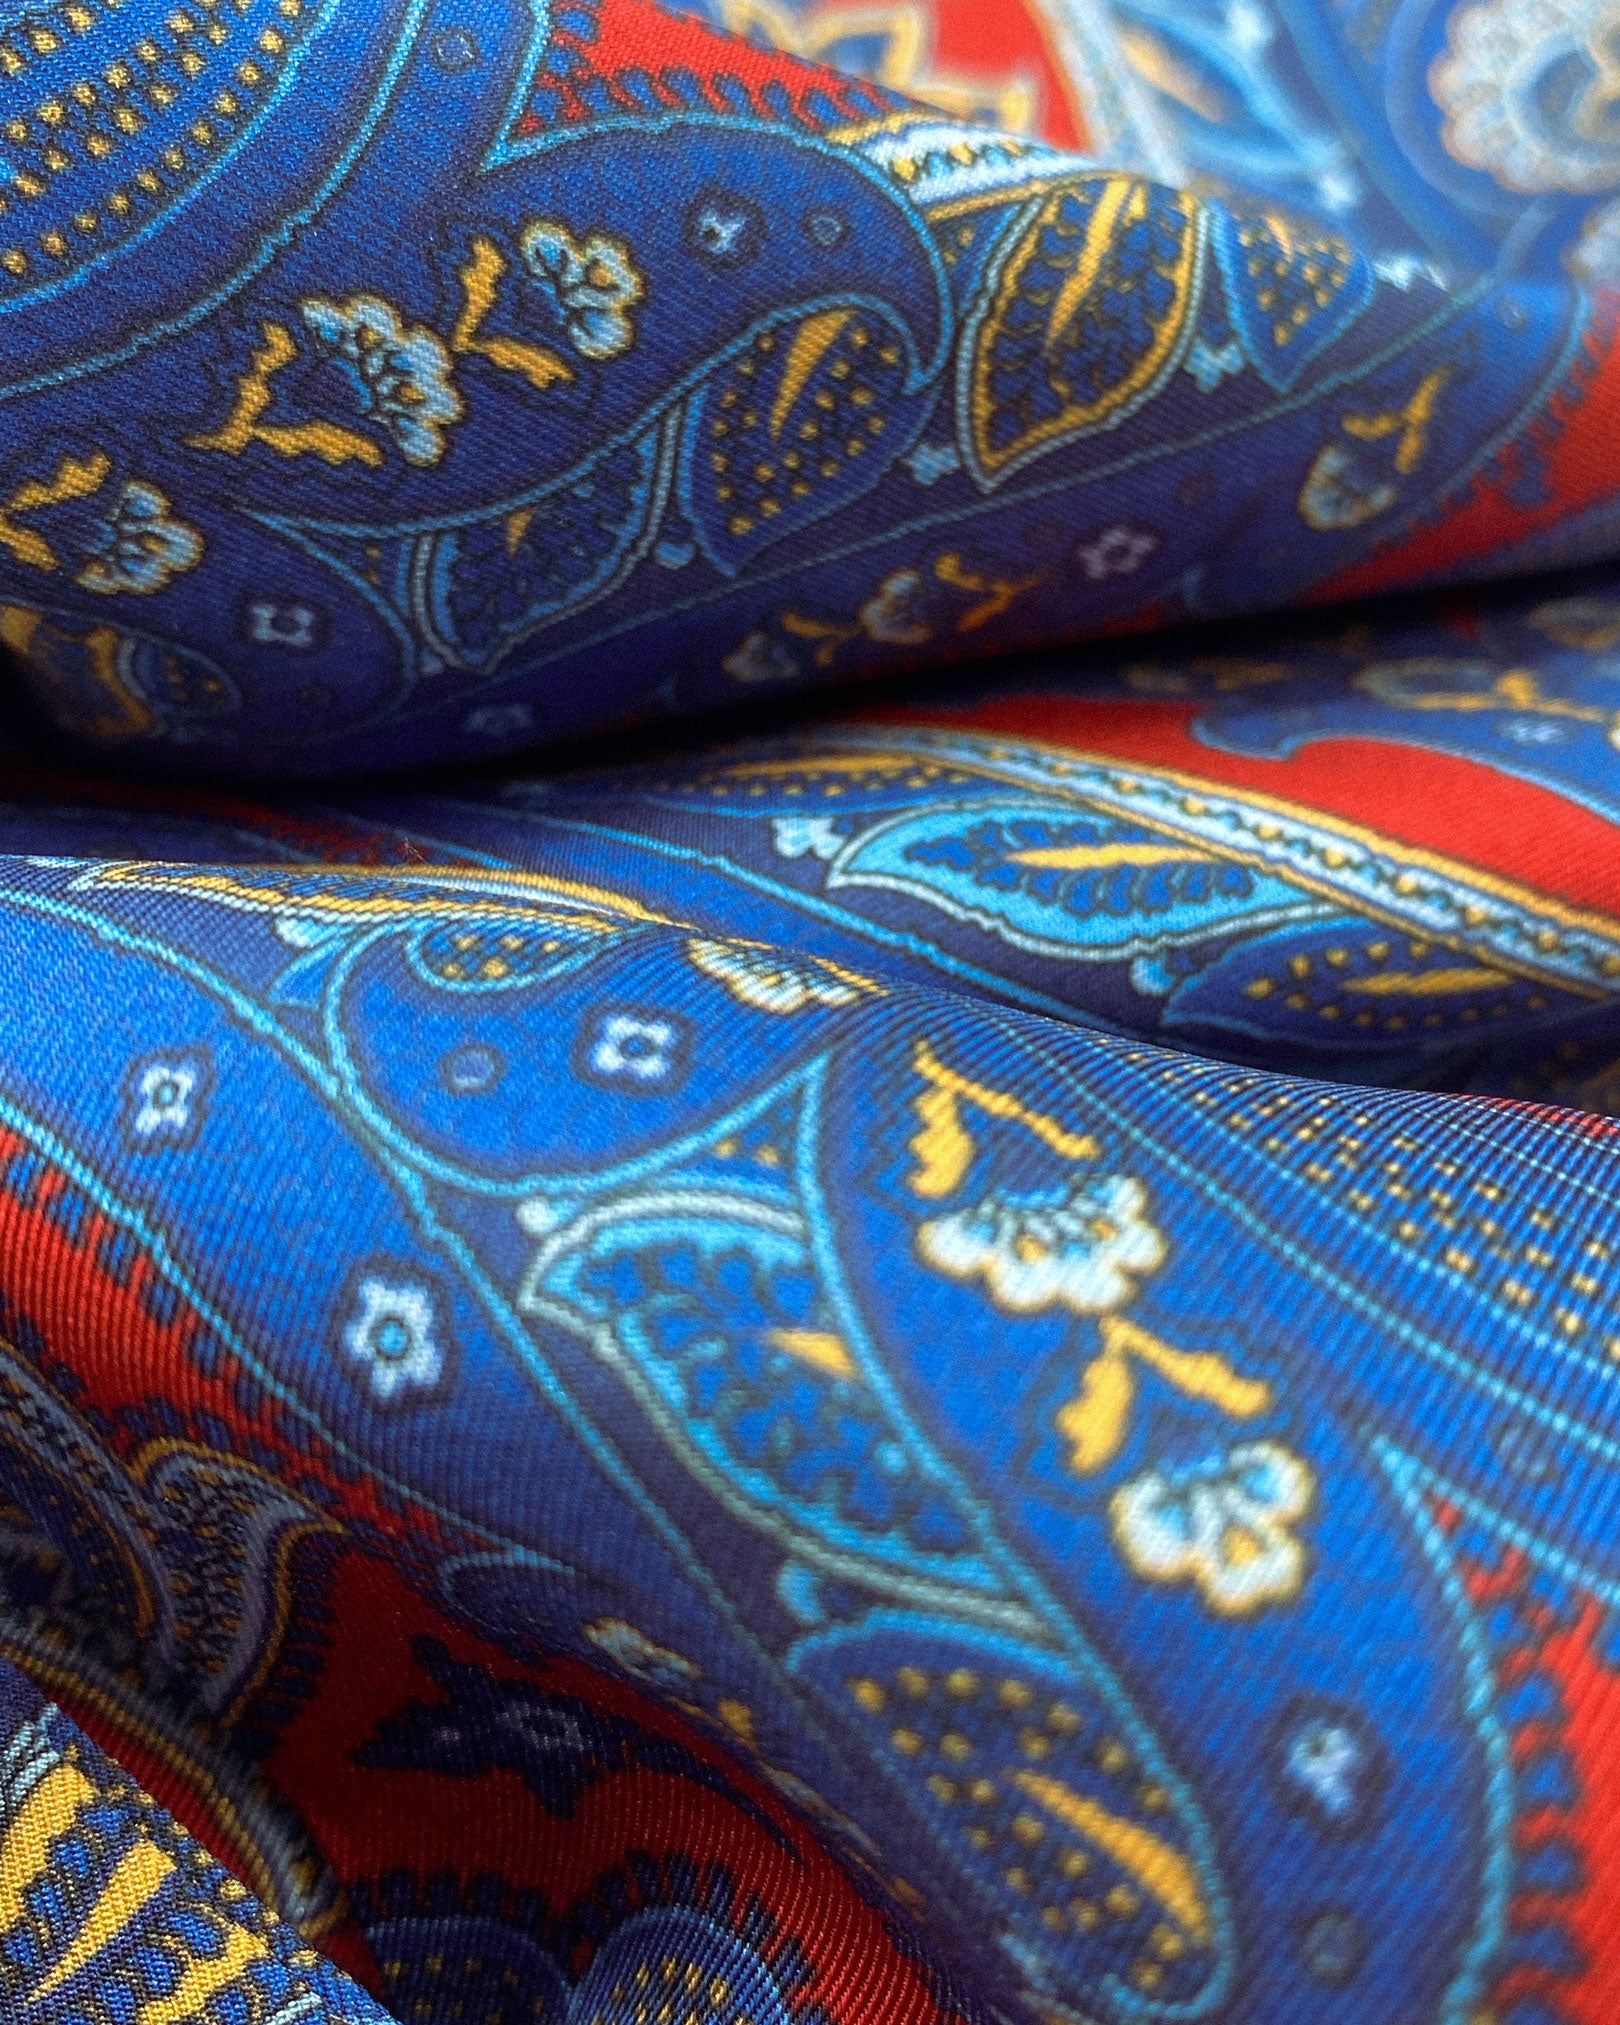 Ruffled close-up view of the Oxford silk aviator scarf, presenting a closer view of the intricate swirls of blue and red paisley and appealing lustre of the material.